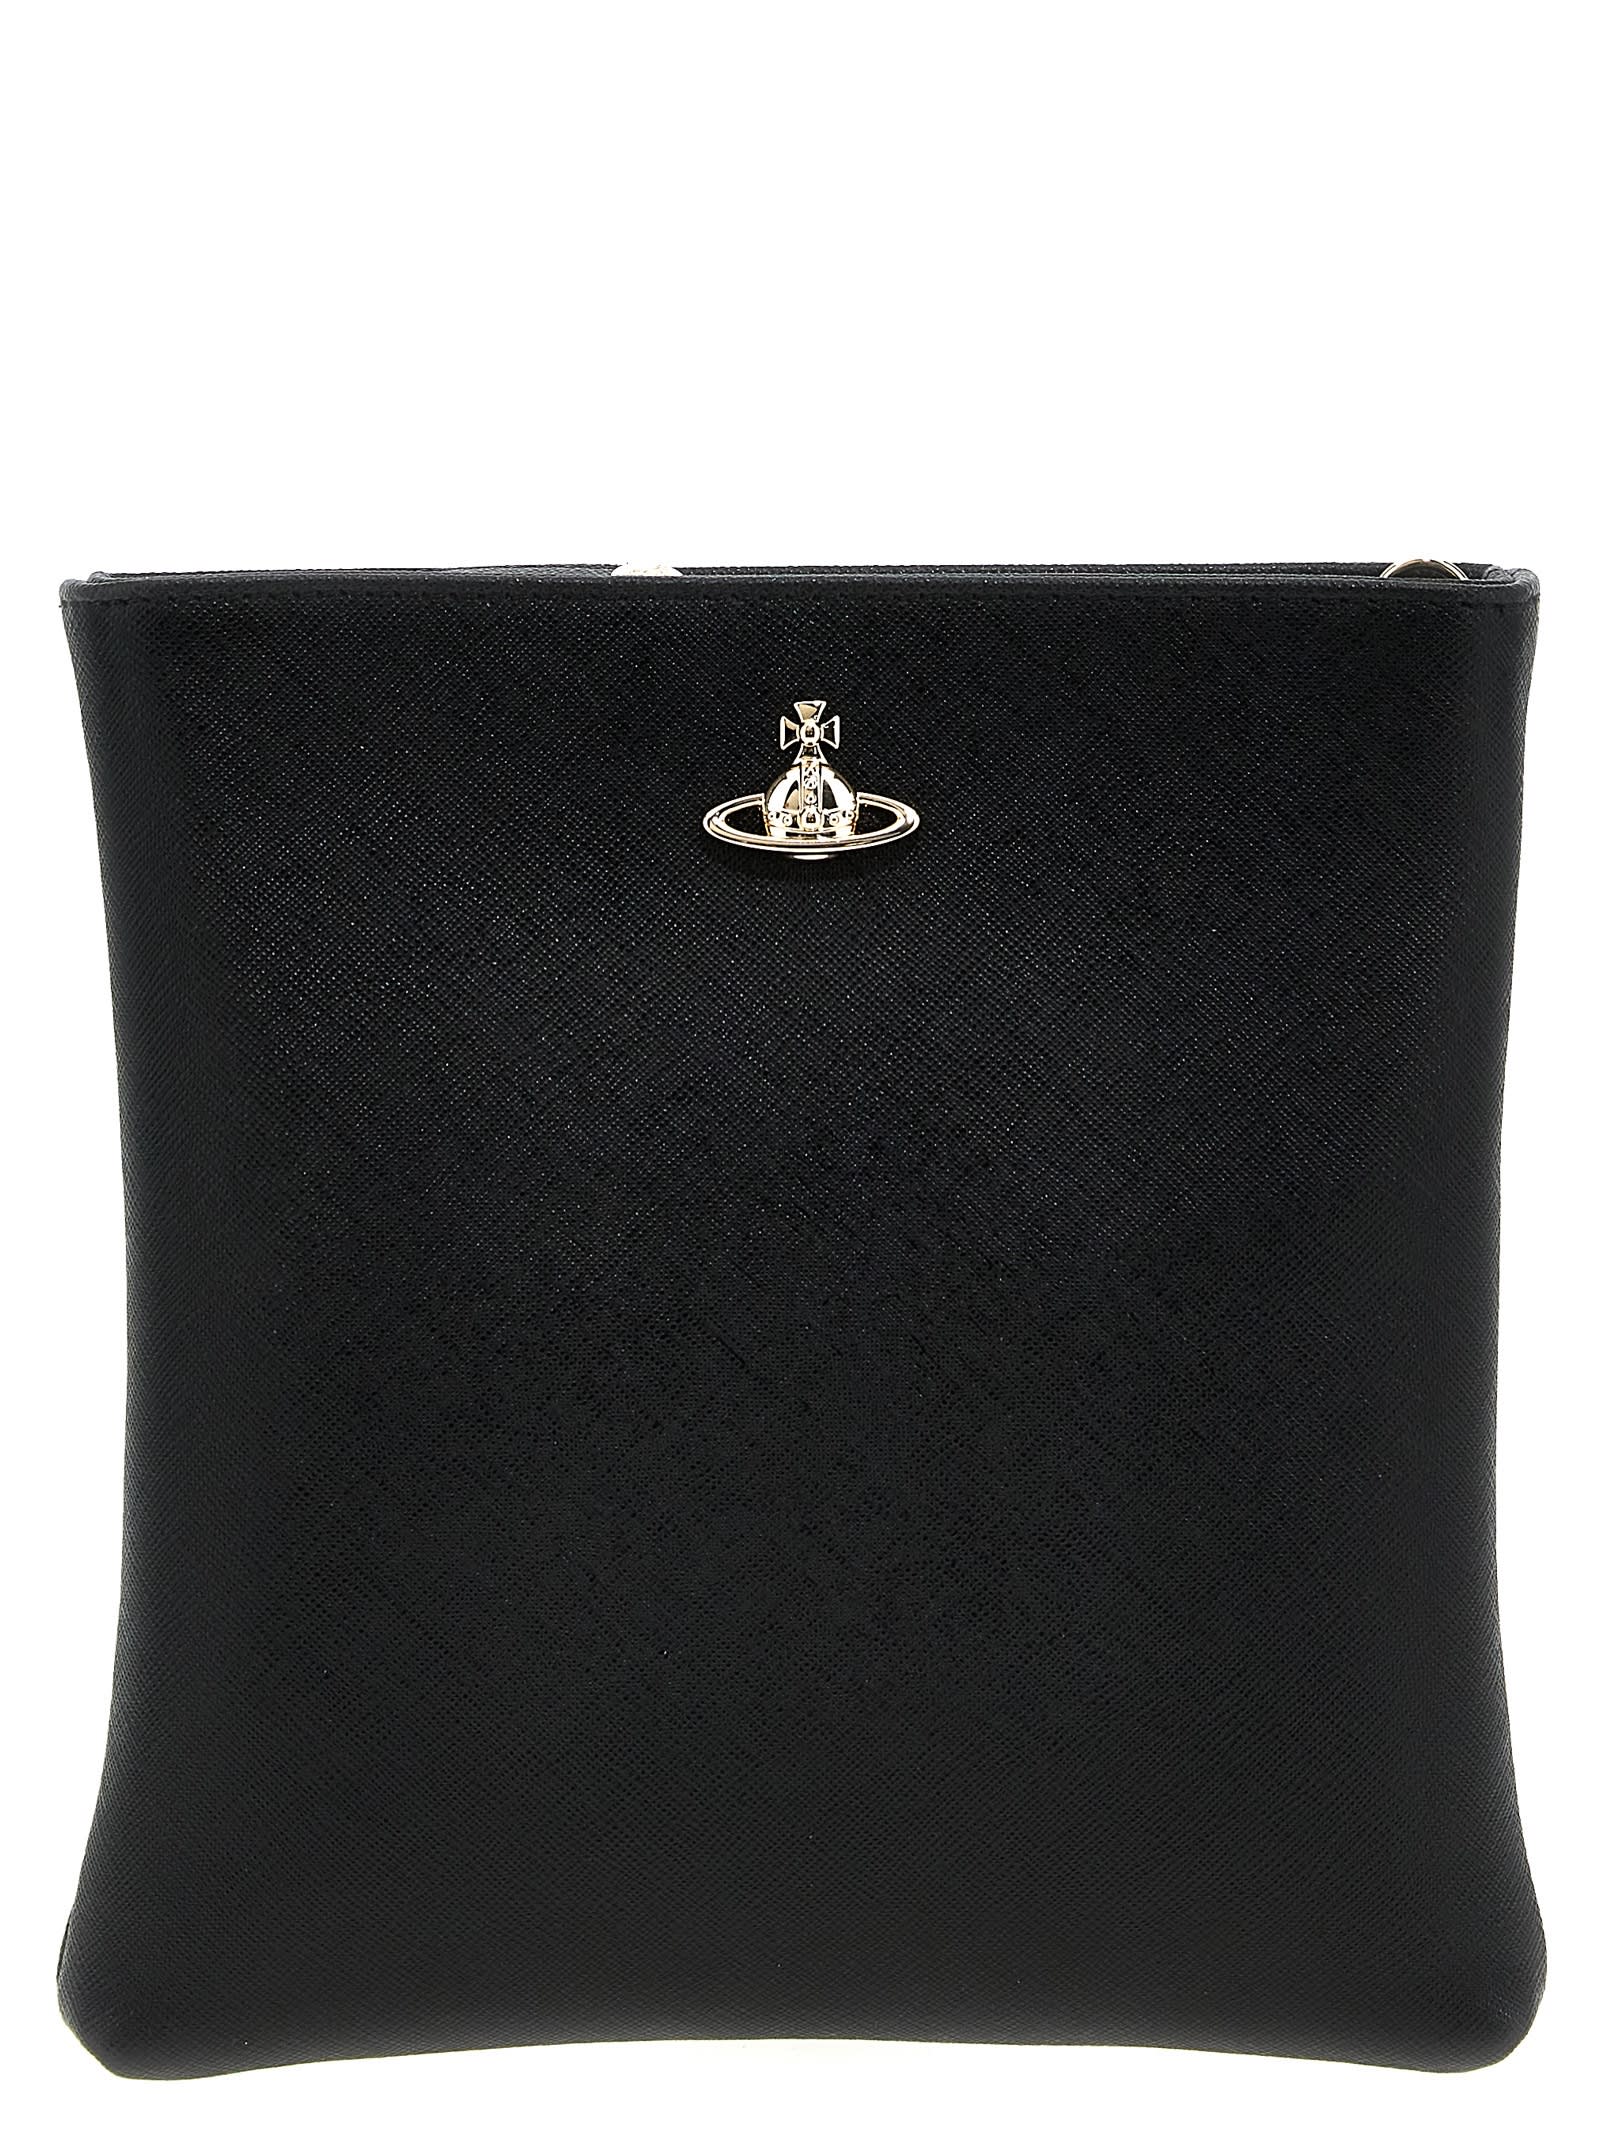 Shop Vivienne Westwood Squire New Square Crossbody Bag In Black